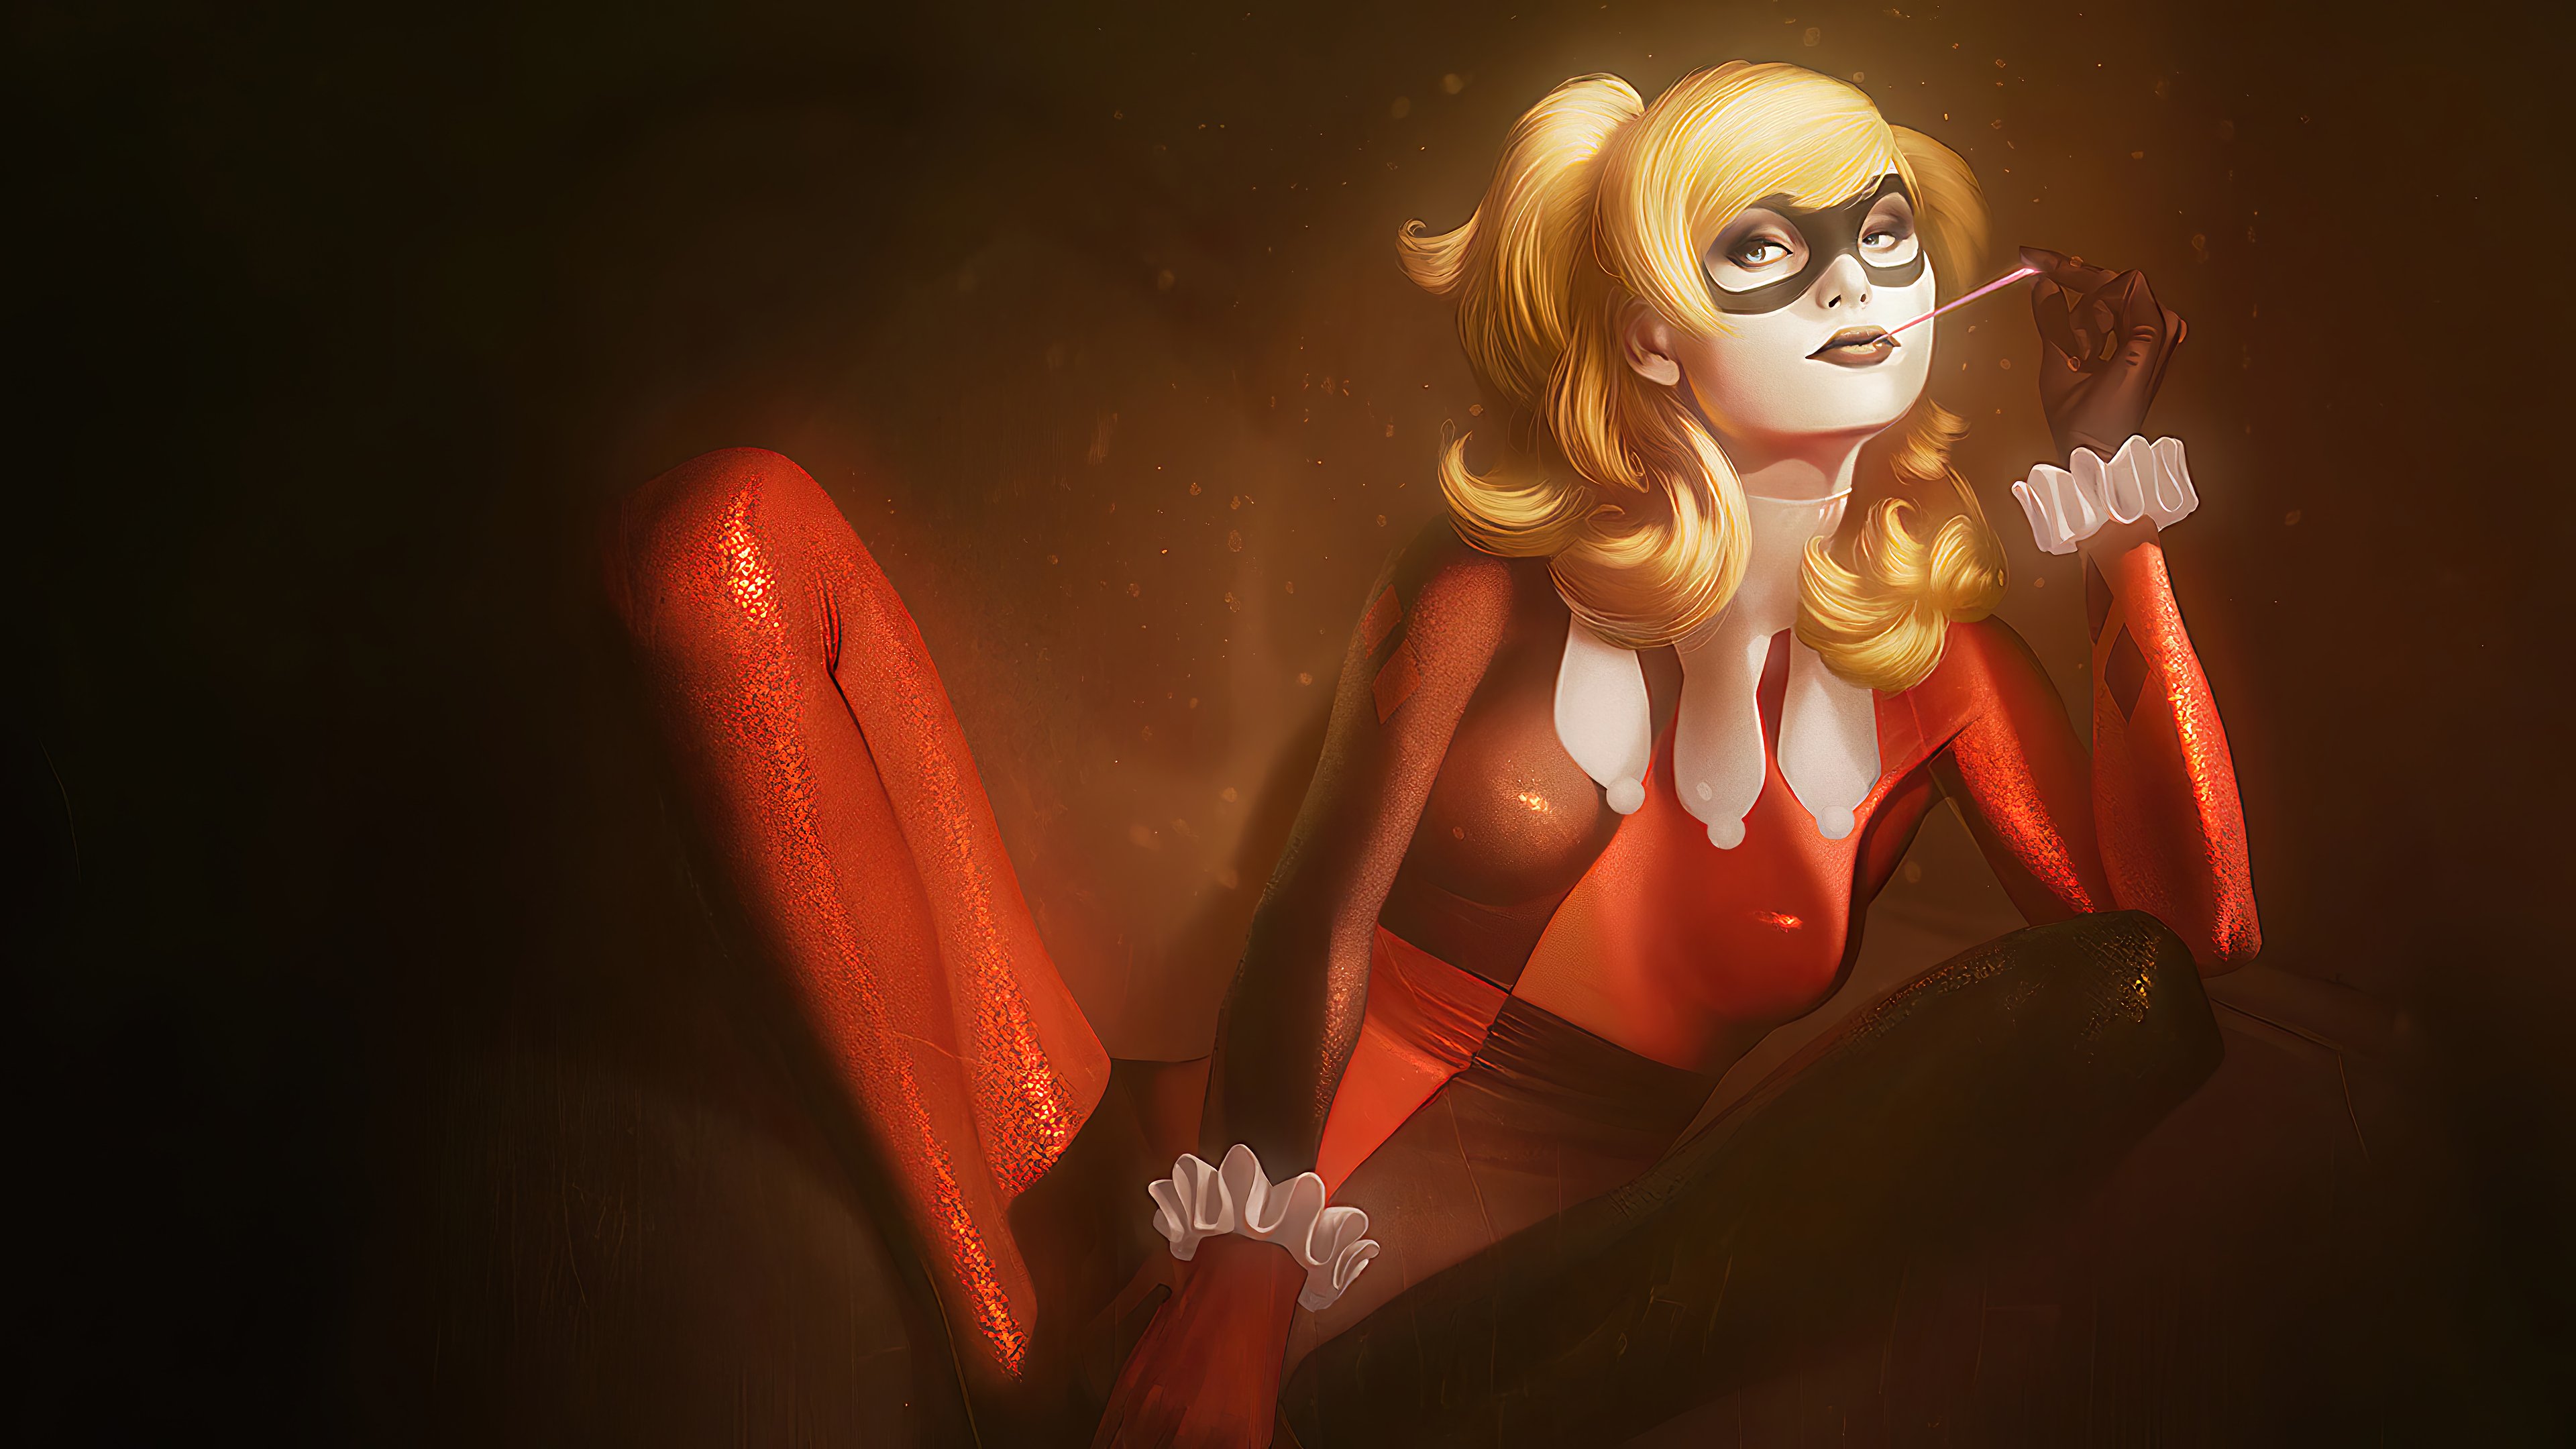 Wallpaper Harley Quinn with red and black costume